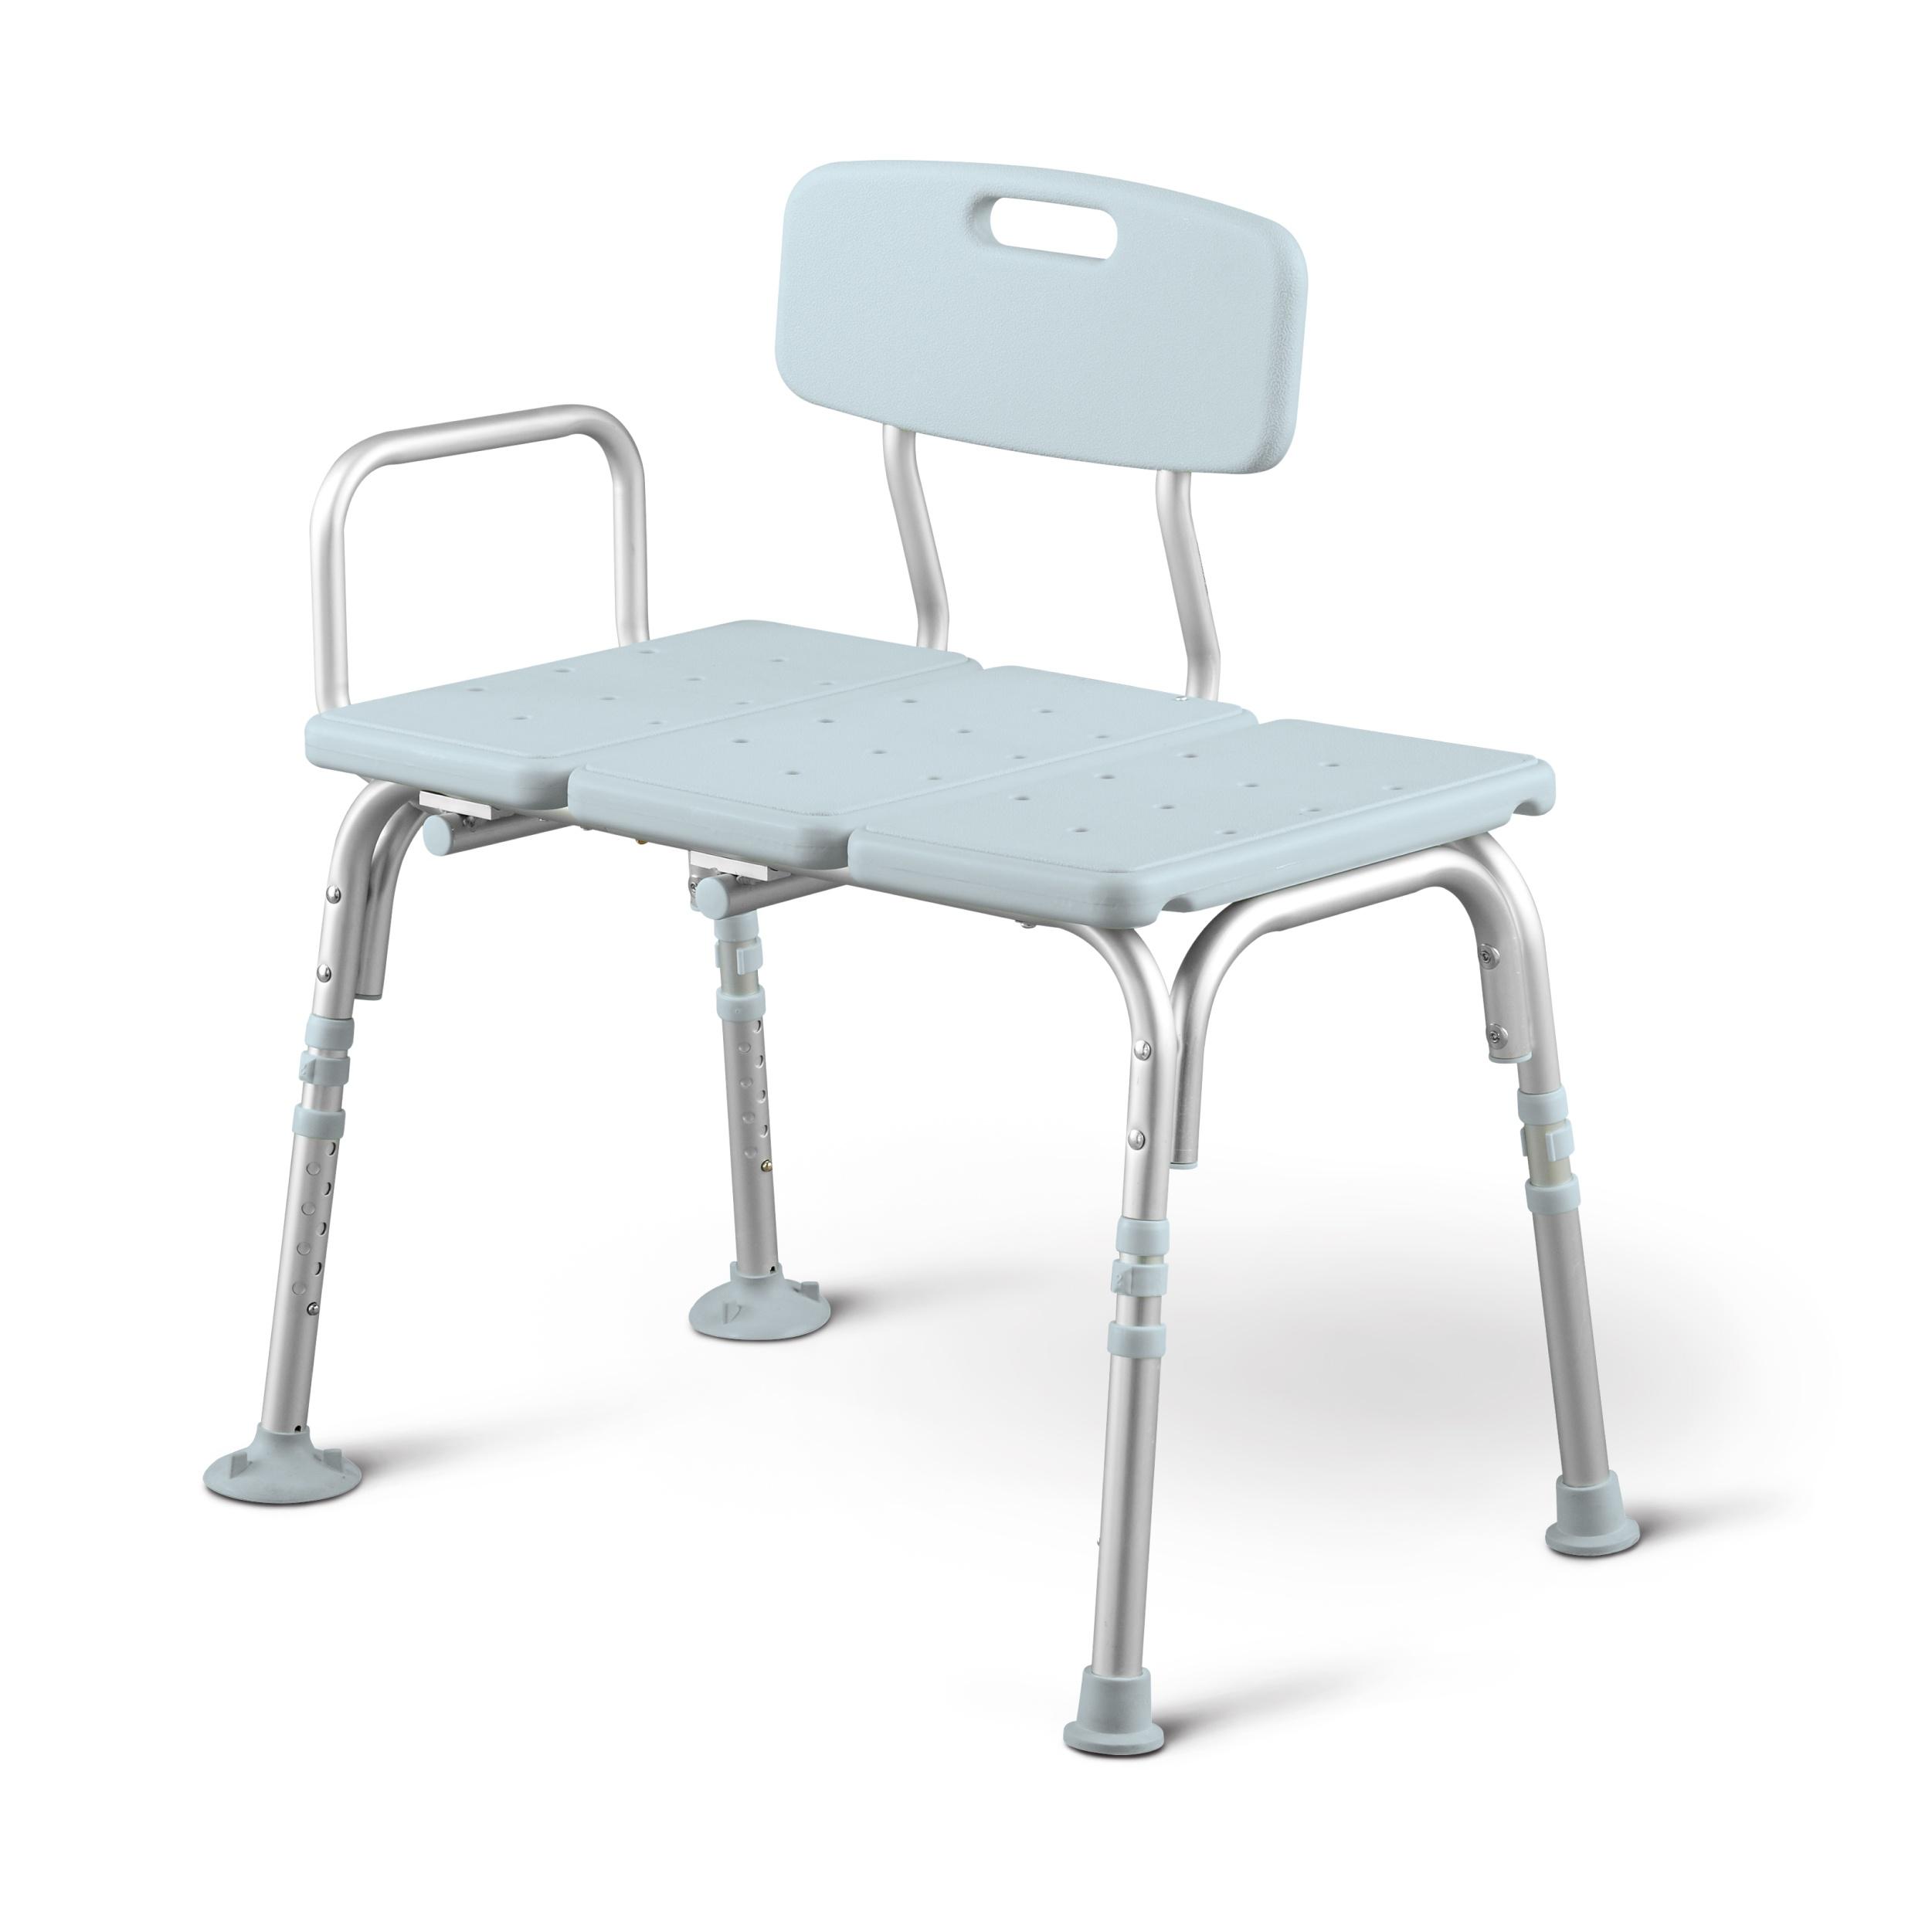 Medline Tub Transfer Bench and Shower Chair with Microban, 350lb Weight Capacity, Blue - image 1 of 6